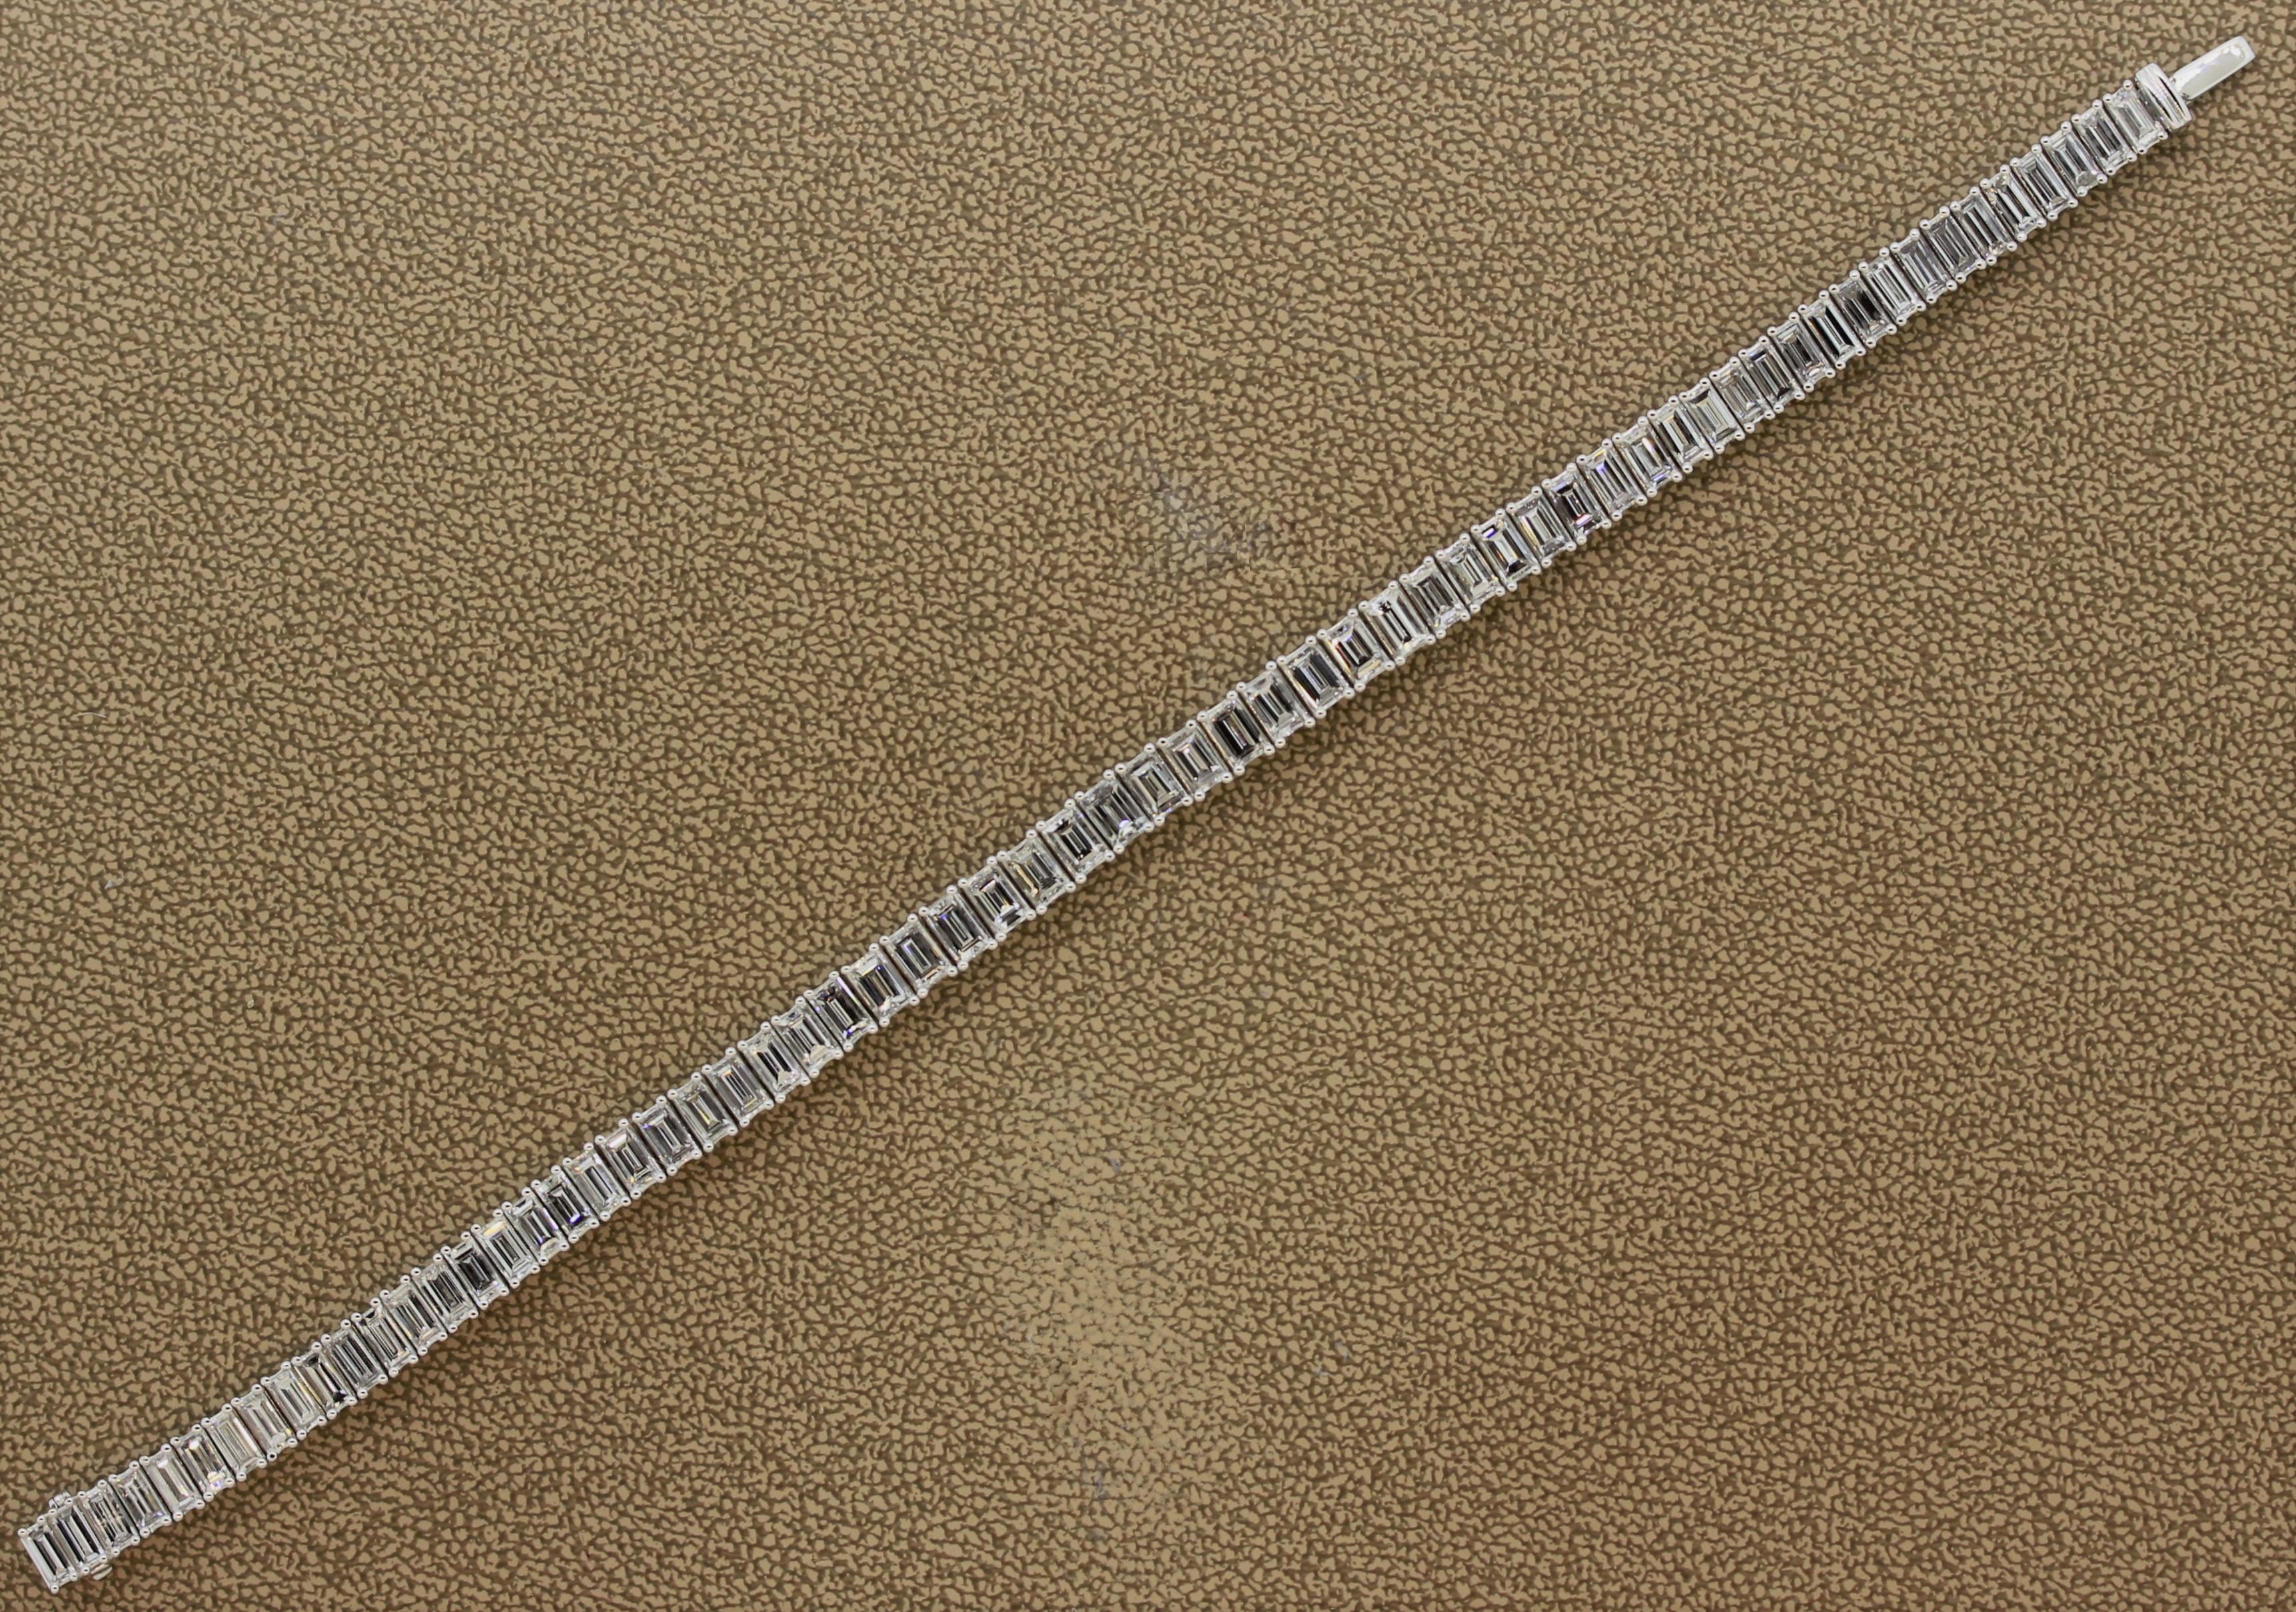 A special tennis bracelet featuring 63 fine square cut diamonds weighing a total of 13.76 carats. They have a clarity of VS2, color of G-H, and weight on average 0.21 carats. The length of the diamonds are 5.35mm. They are hand set in 18k white gold